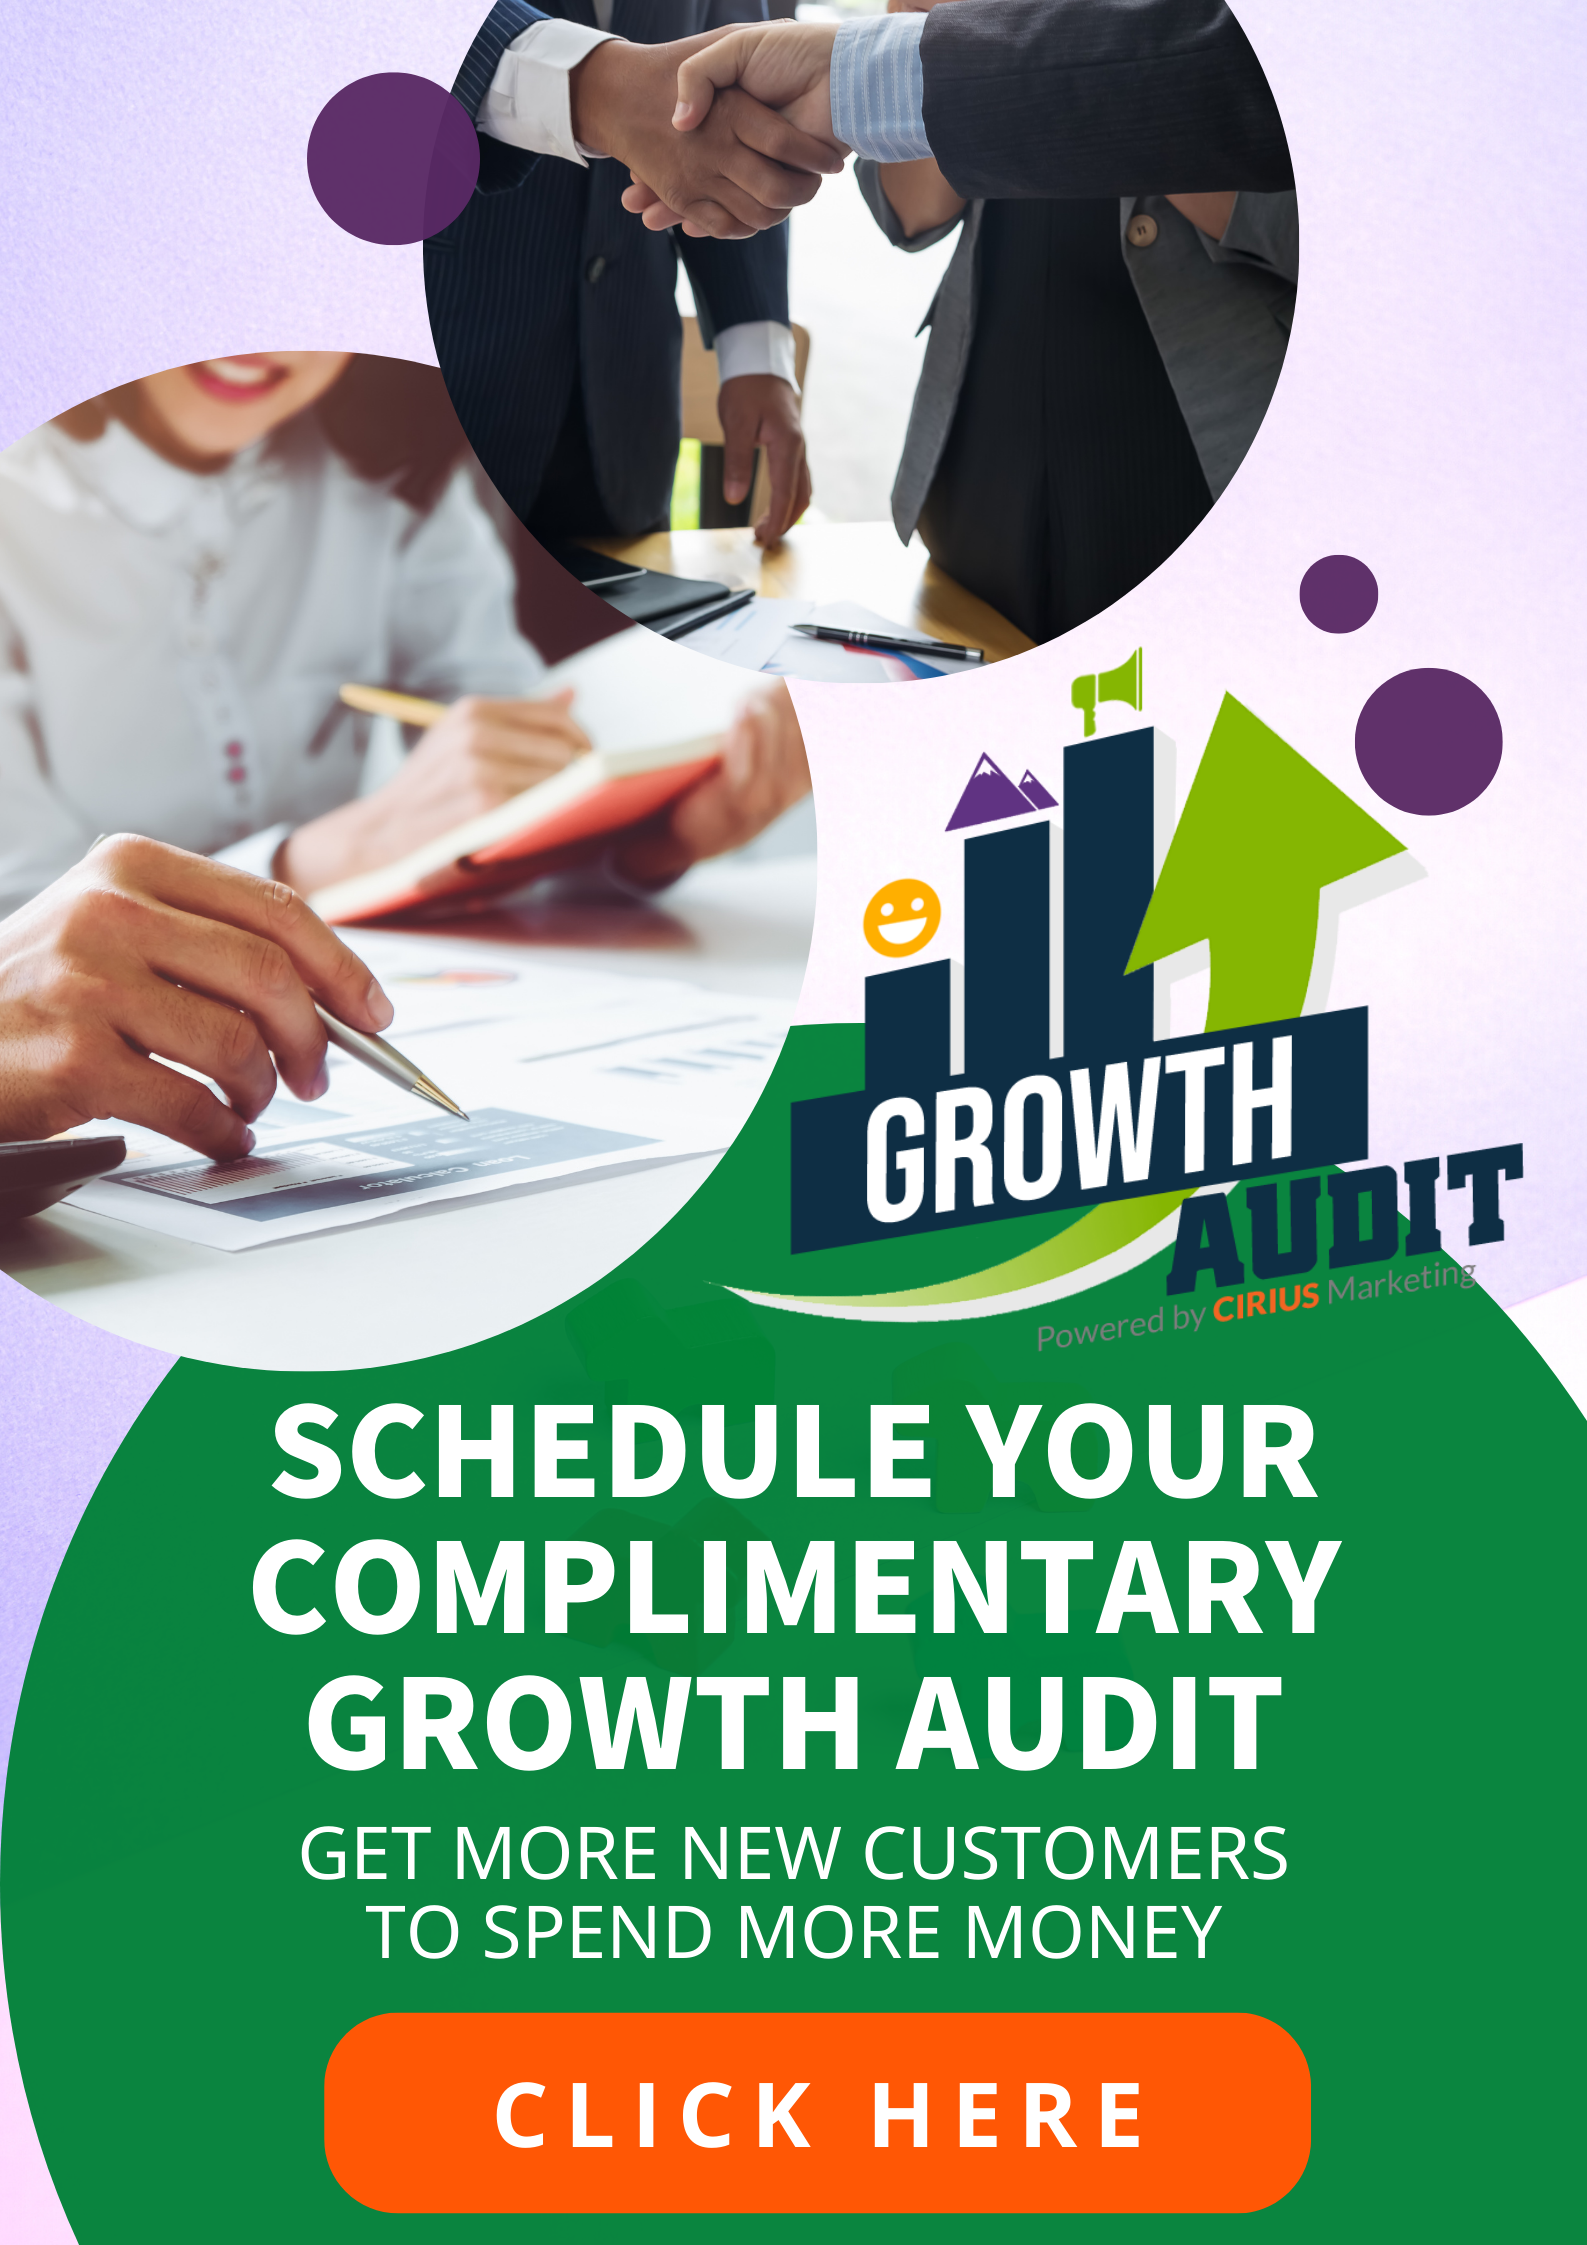 Complimentary Growth Audit